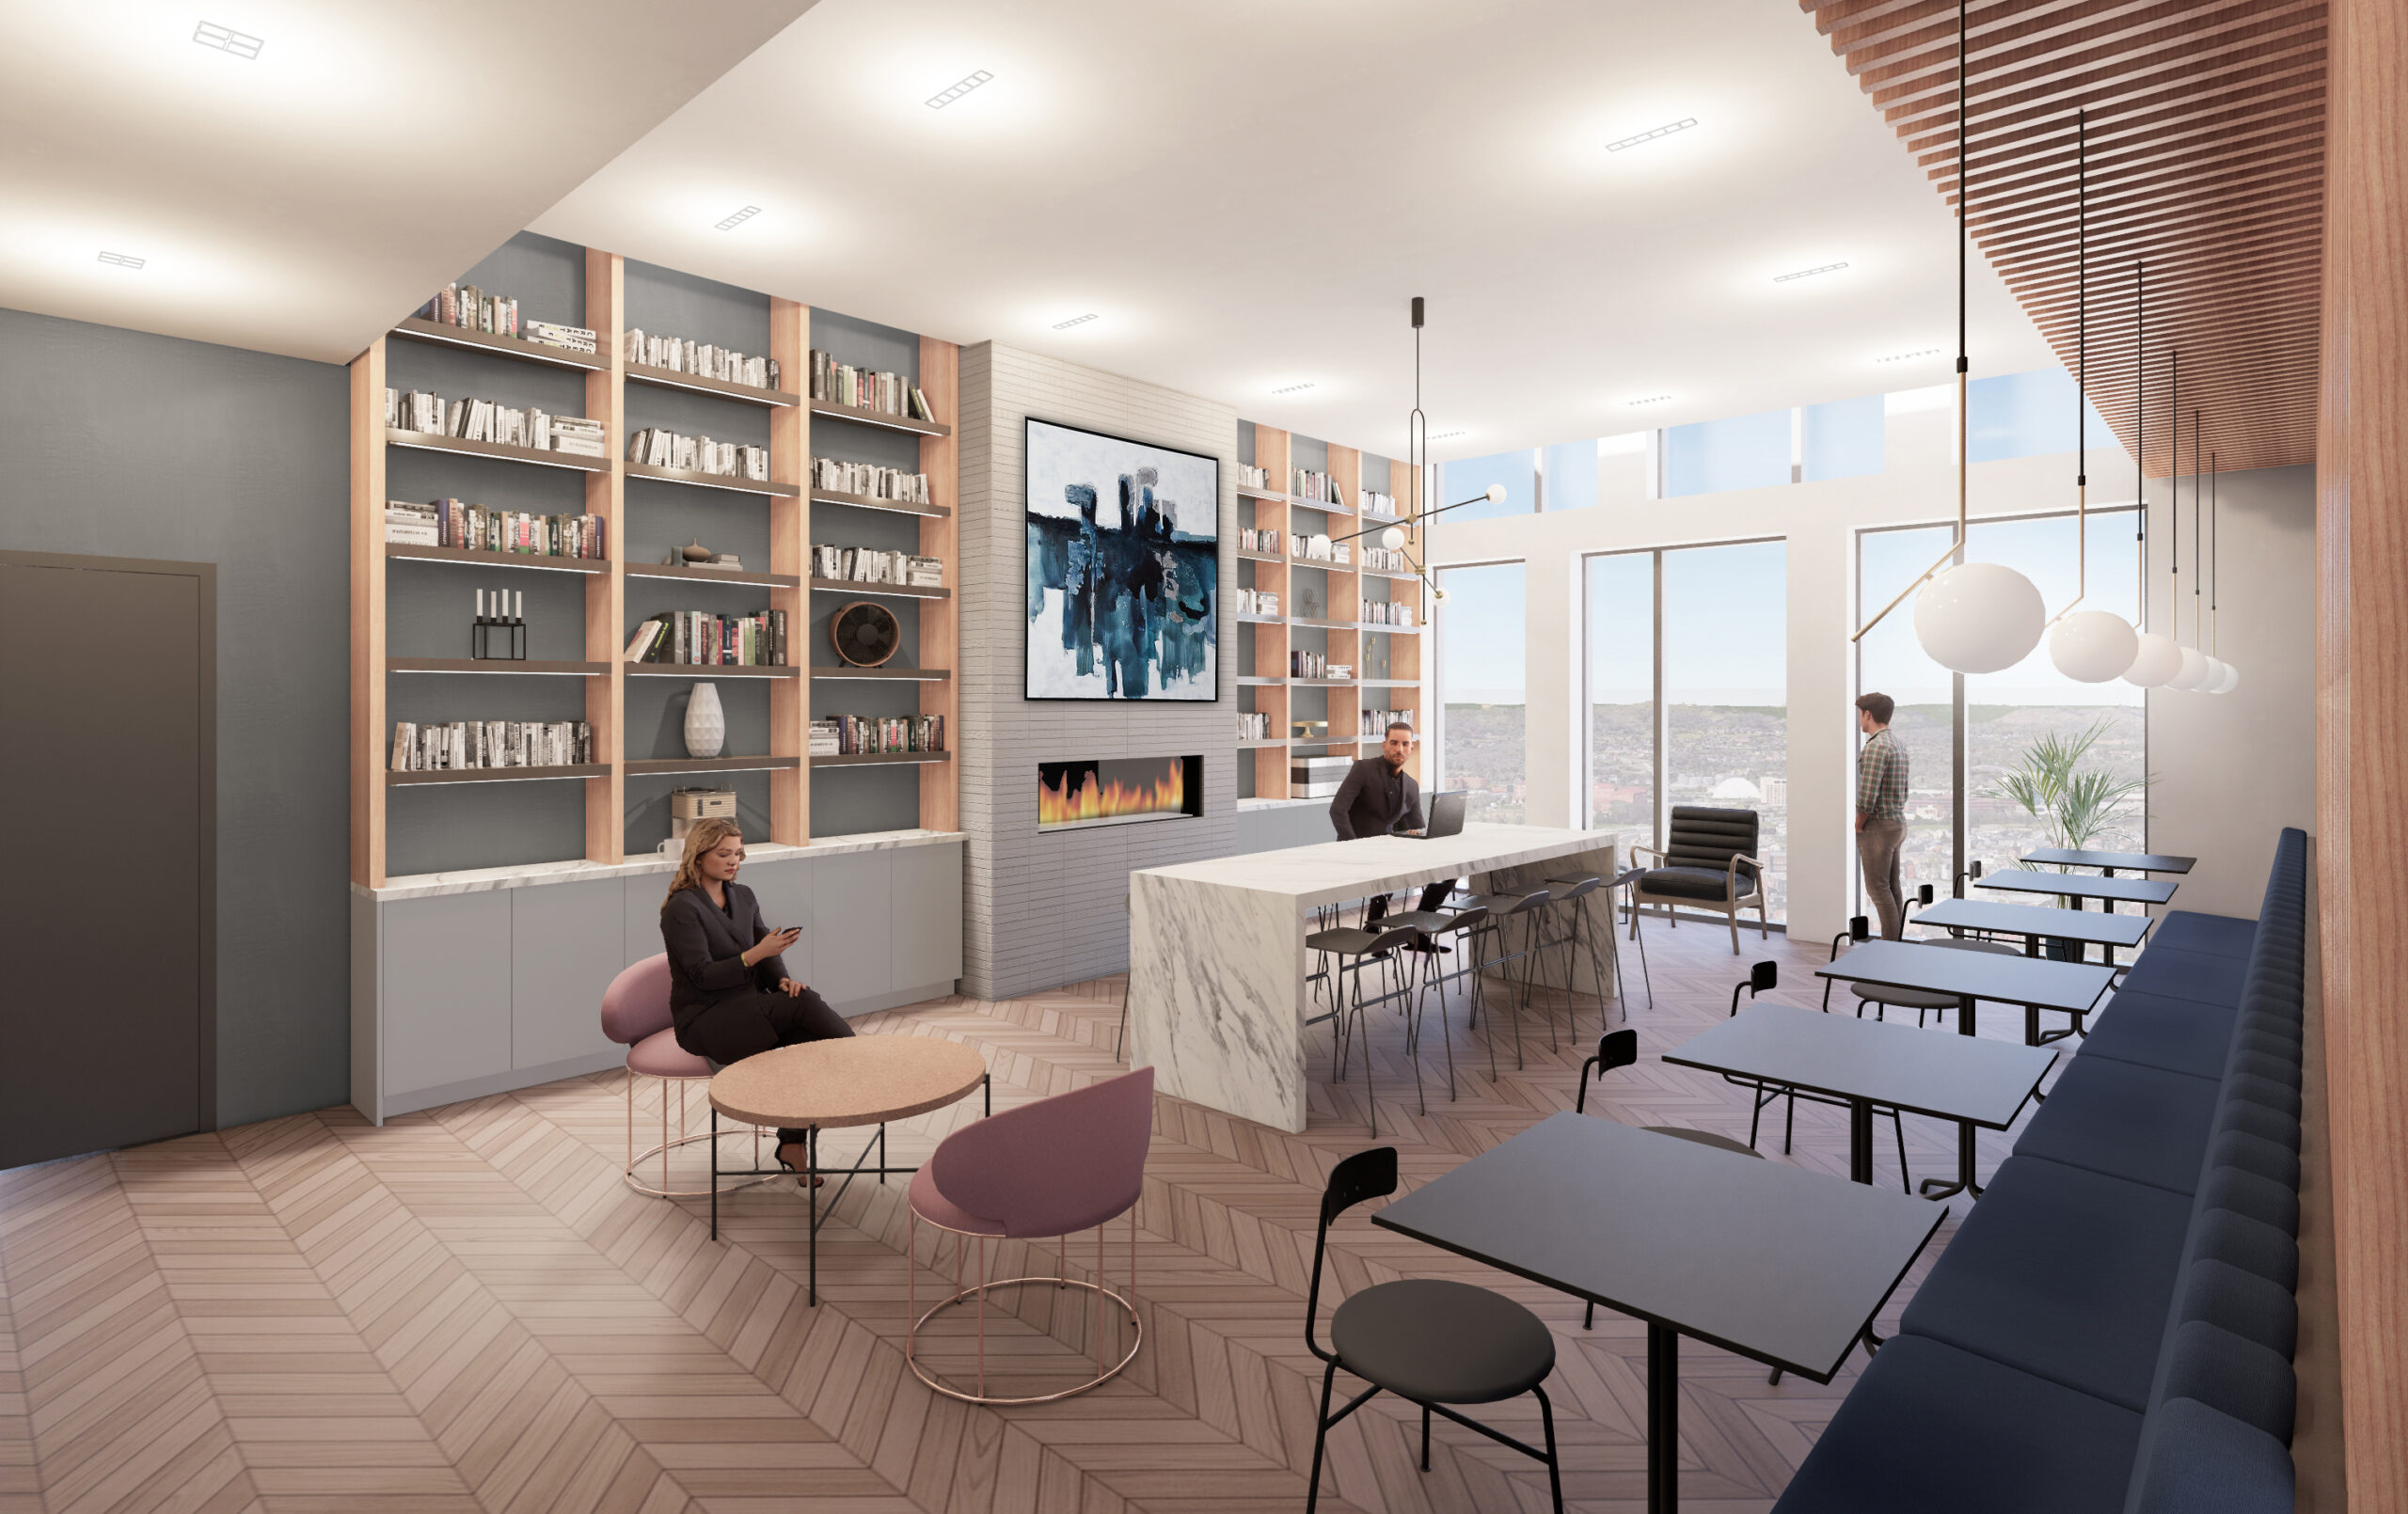 rendering of library